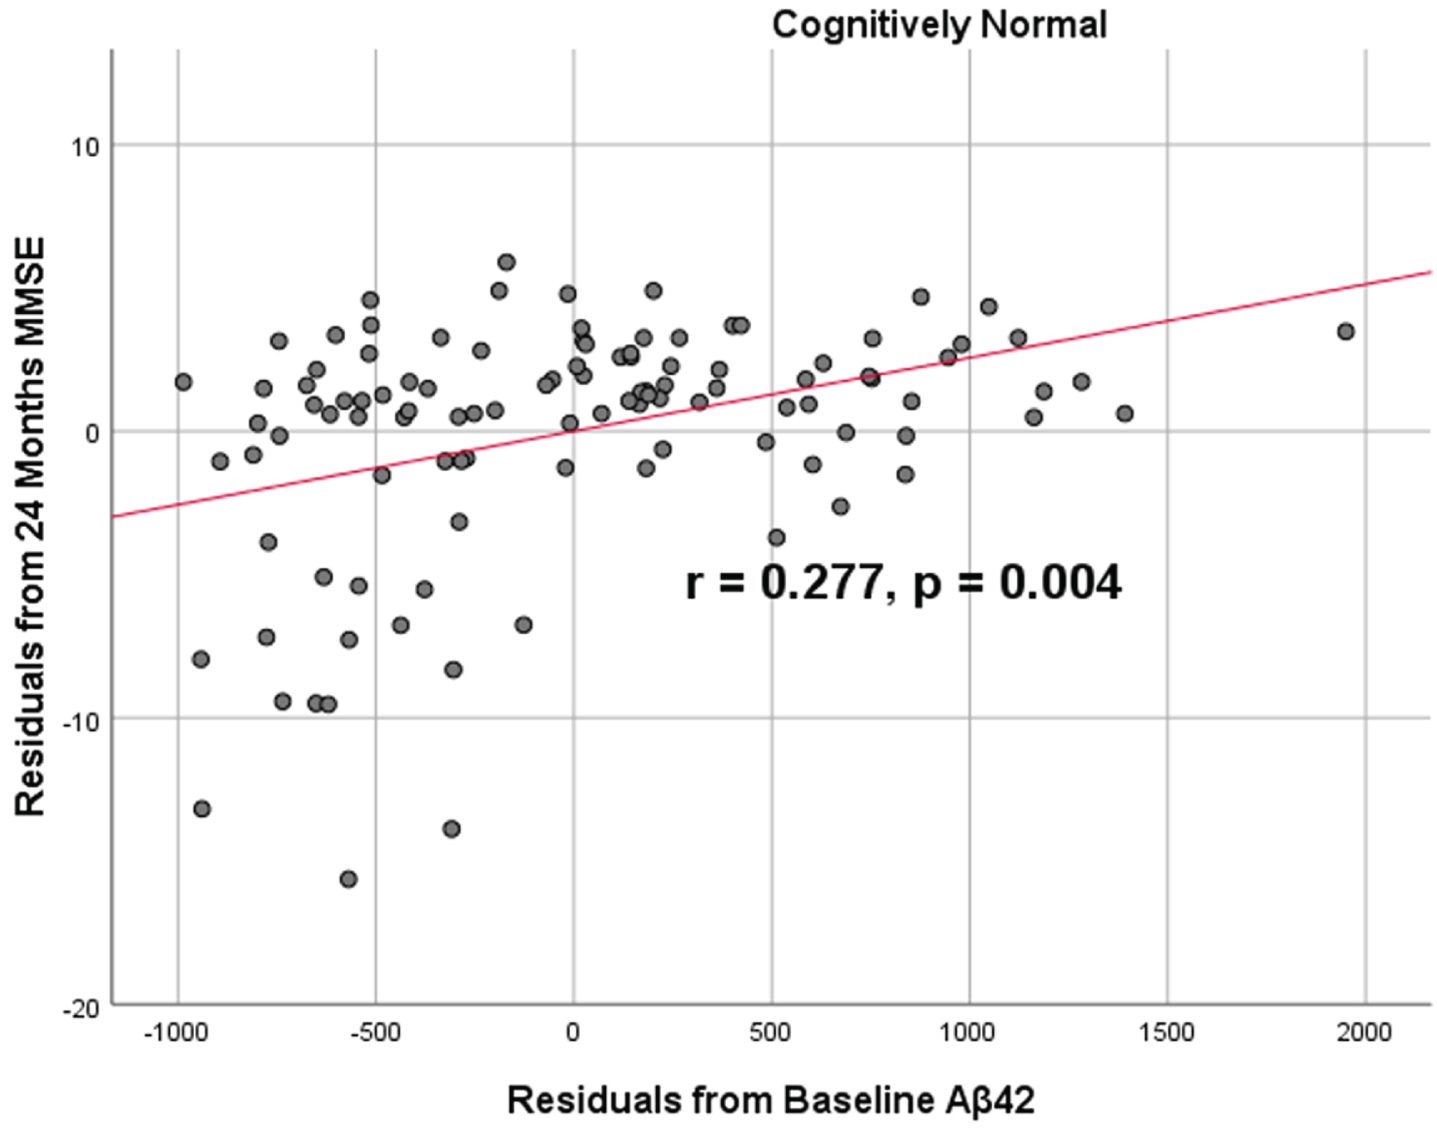 Partial correlations between baseline Aβ42 concentration and 24 months neurocognitive function in normal controls, corrected for age and education. Scatterplots above are corrected for age and education. Aβ42 versus MMSE (r = 0.277, p = 0.004).